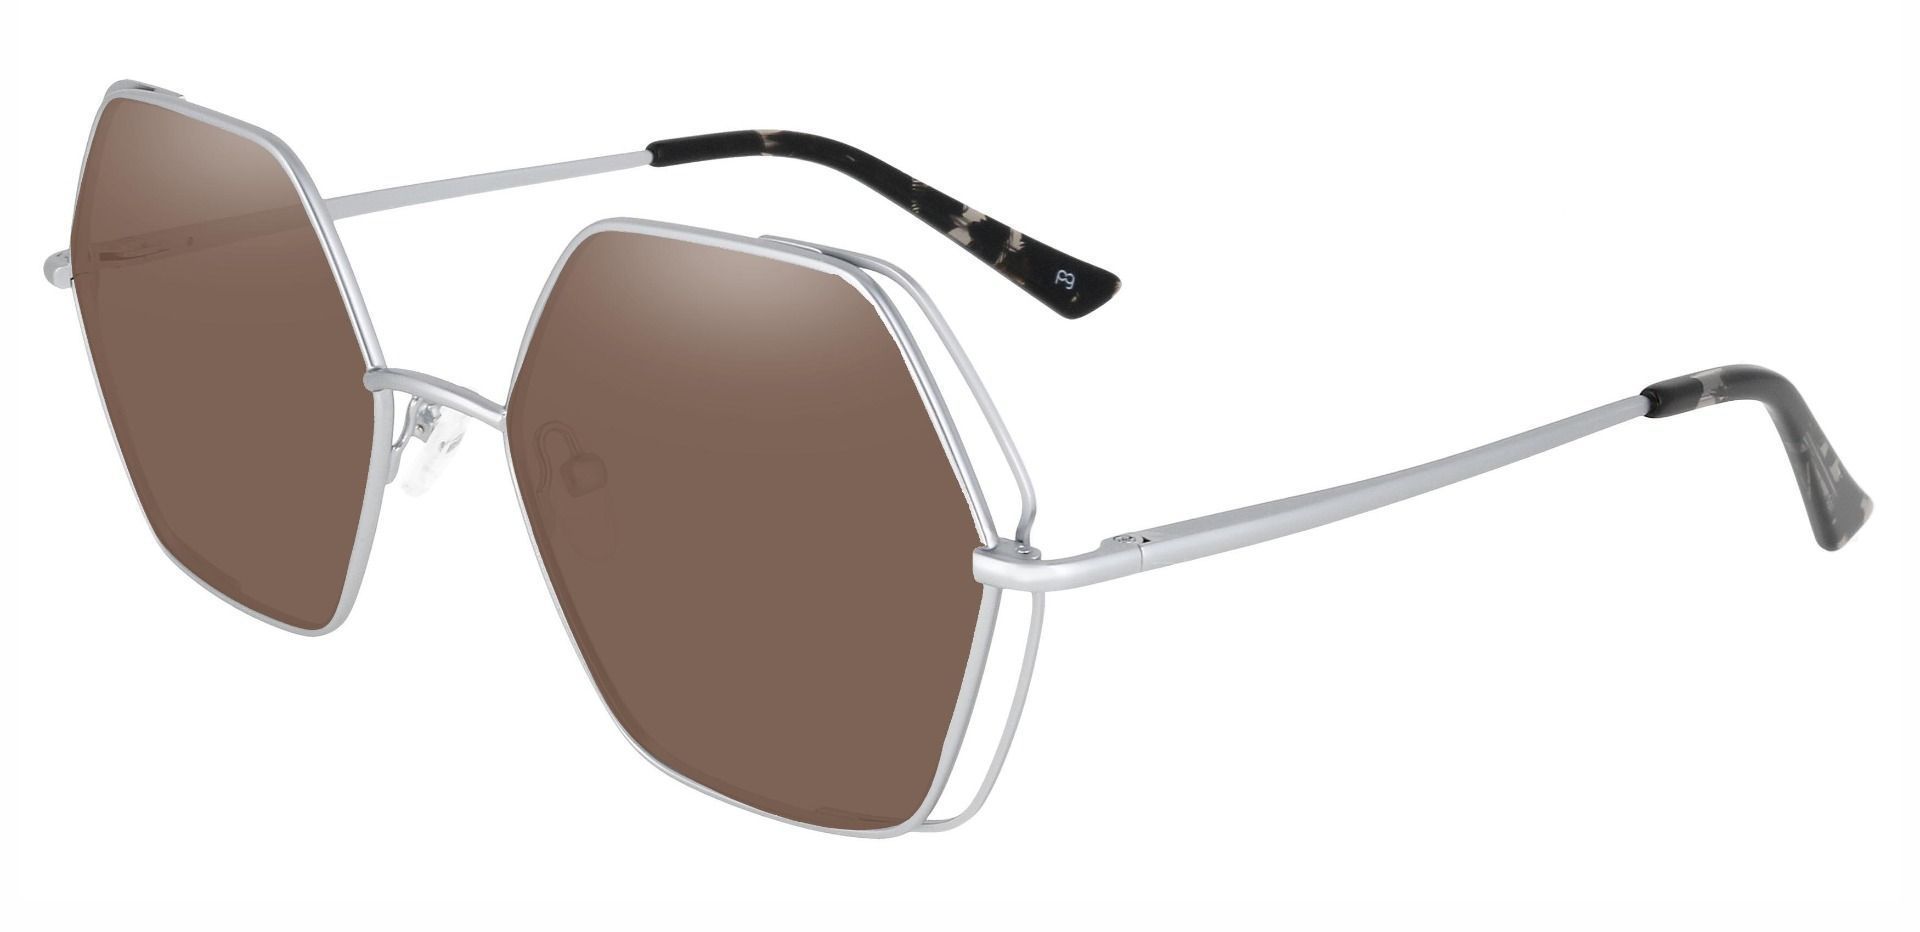 Hawley Geometric Reading Sunglasses - Silver Frame With Brown Lenses